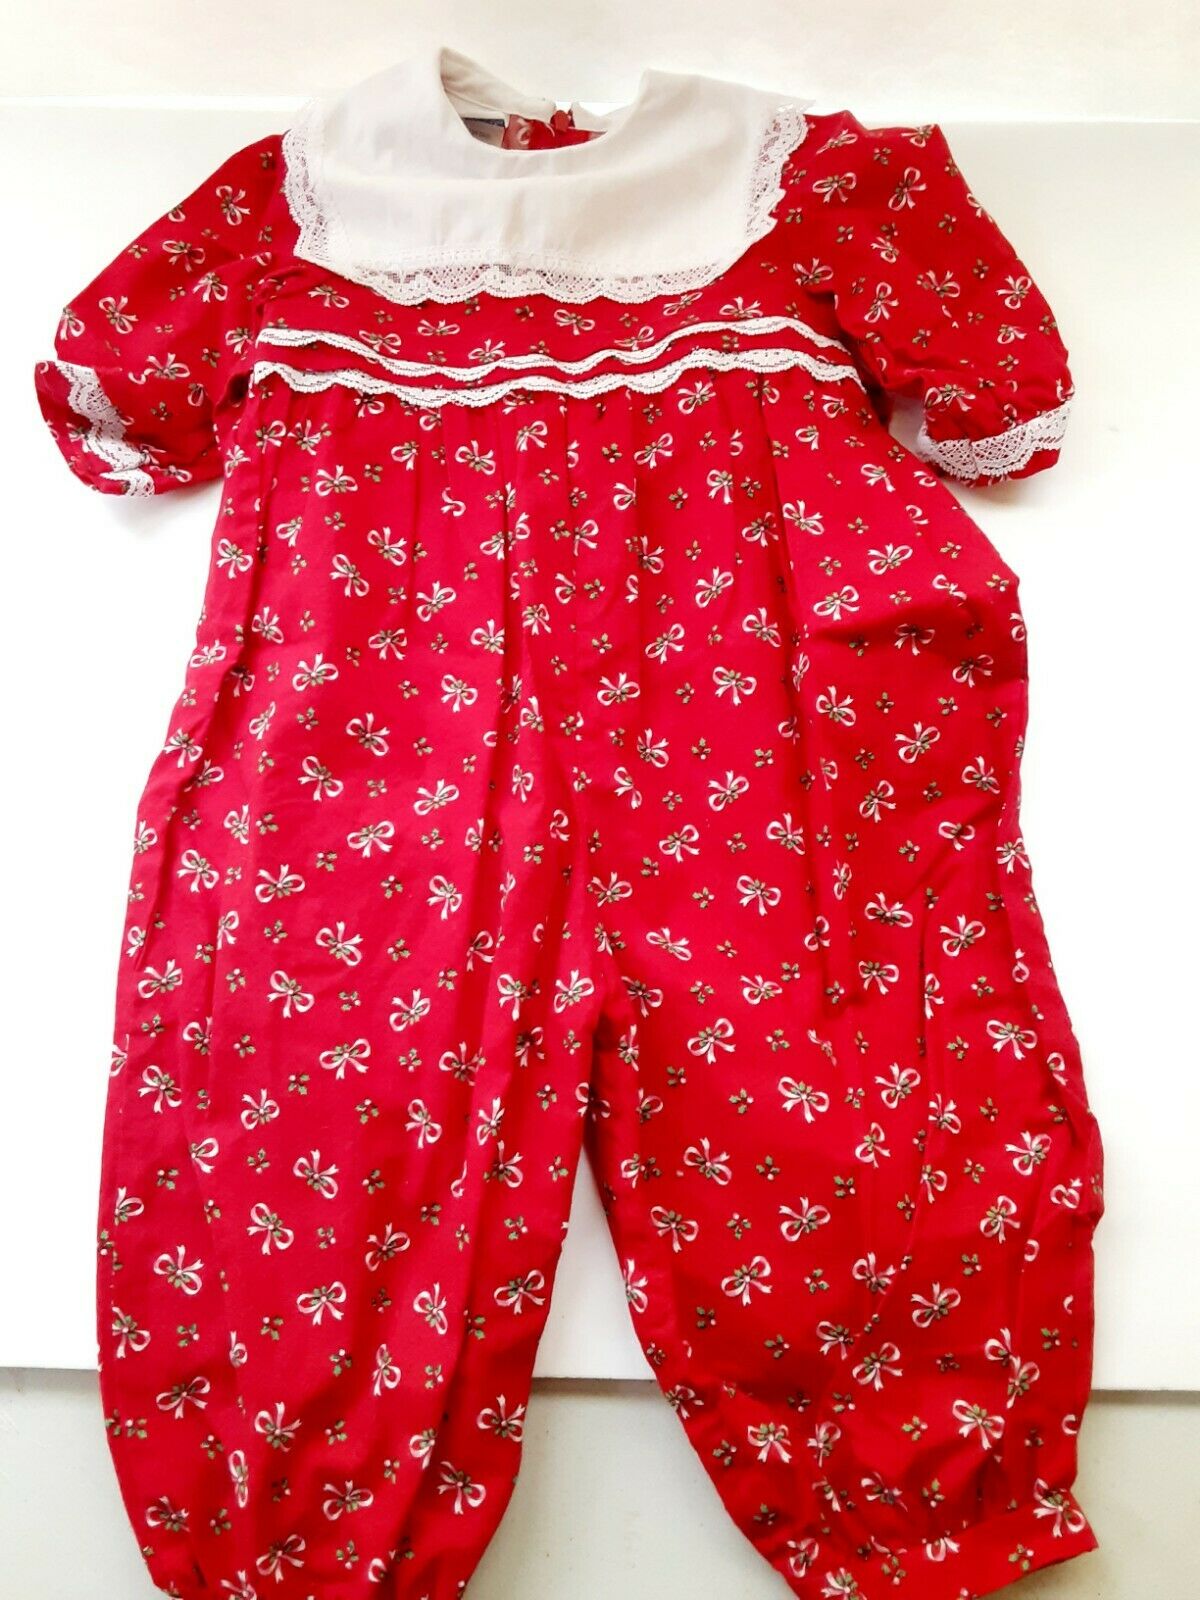 Polly Flinders Vintage Christmas Floral Romper 12 Mos Red White Bow Holly Collar